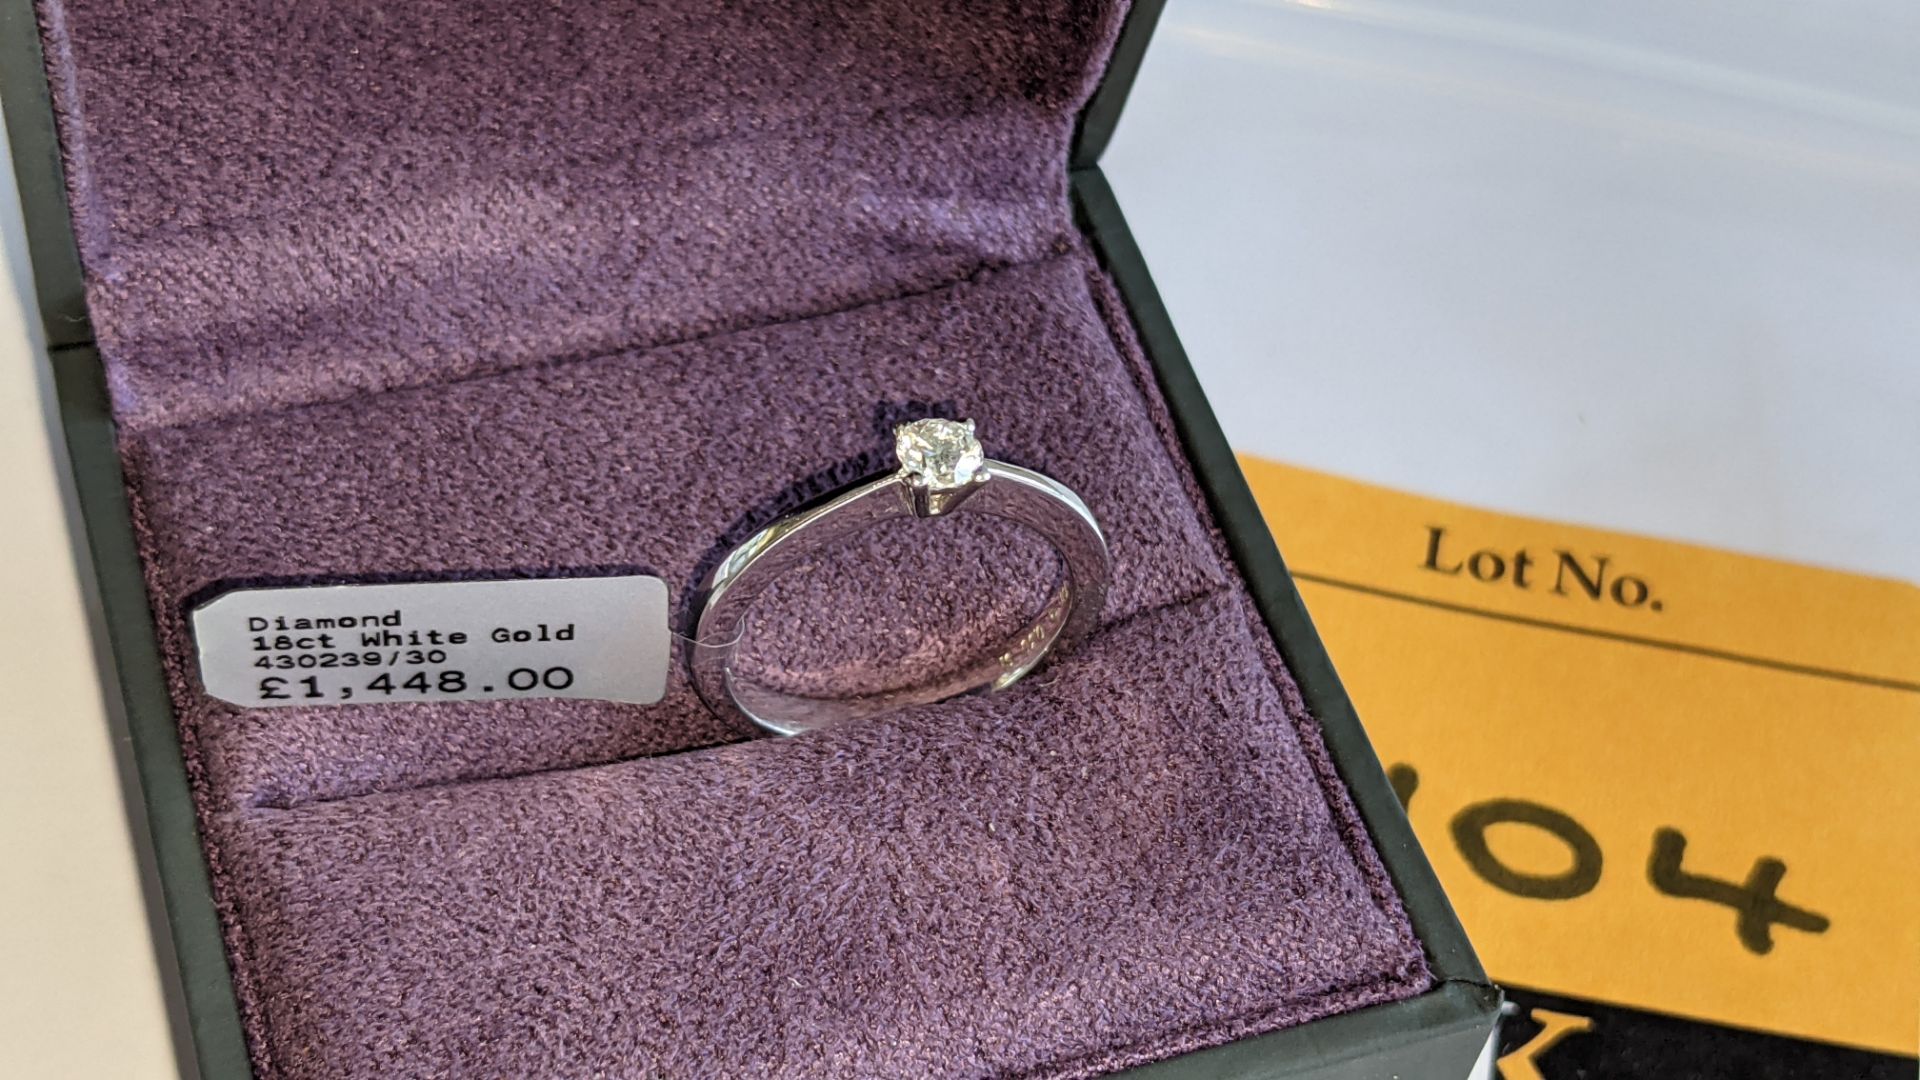 18ct white gold & diamond ring with 0.30ct H/Si stone RRP £1,448 - Image 3 of 15